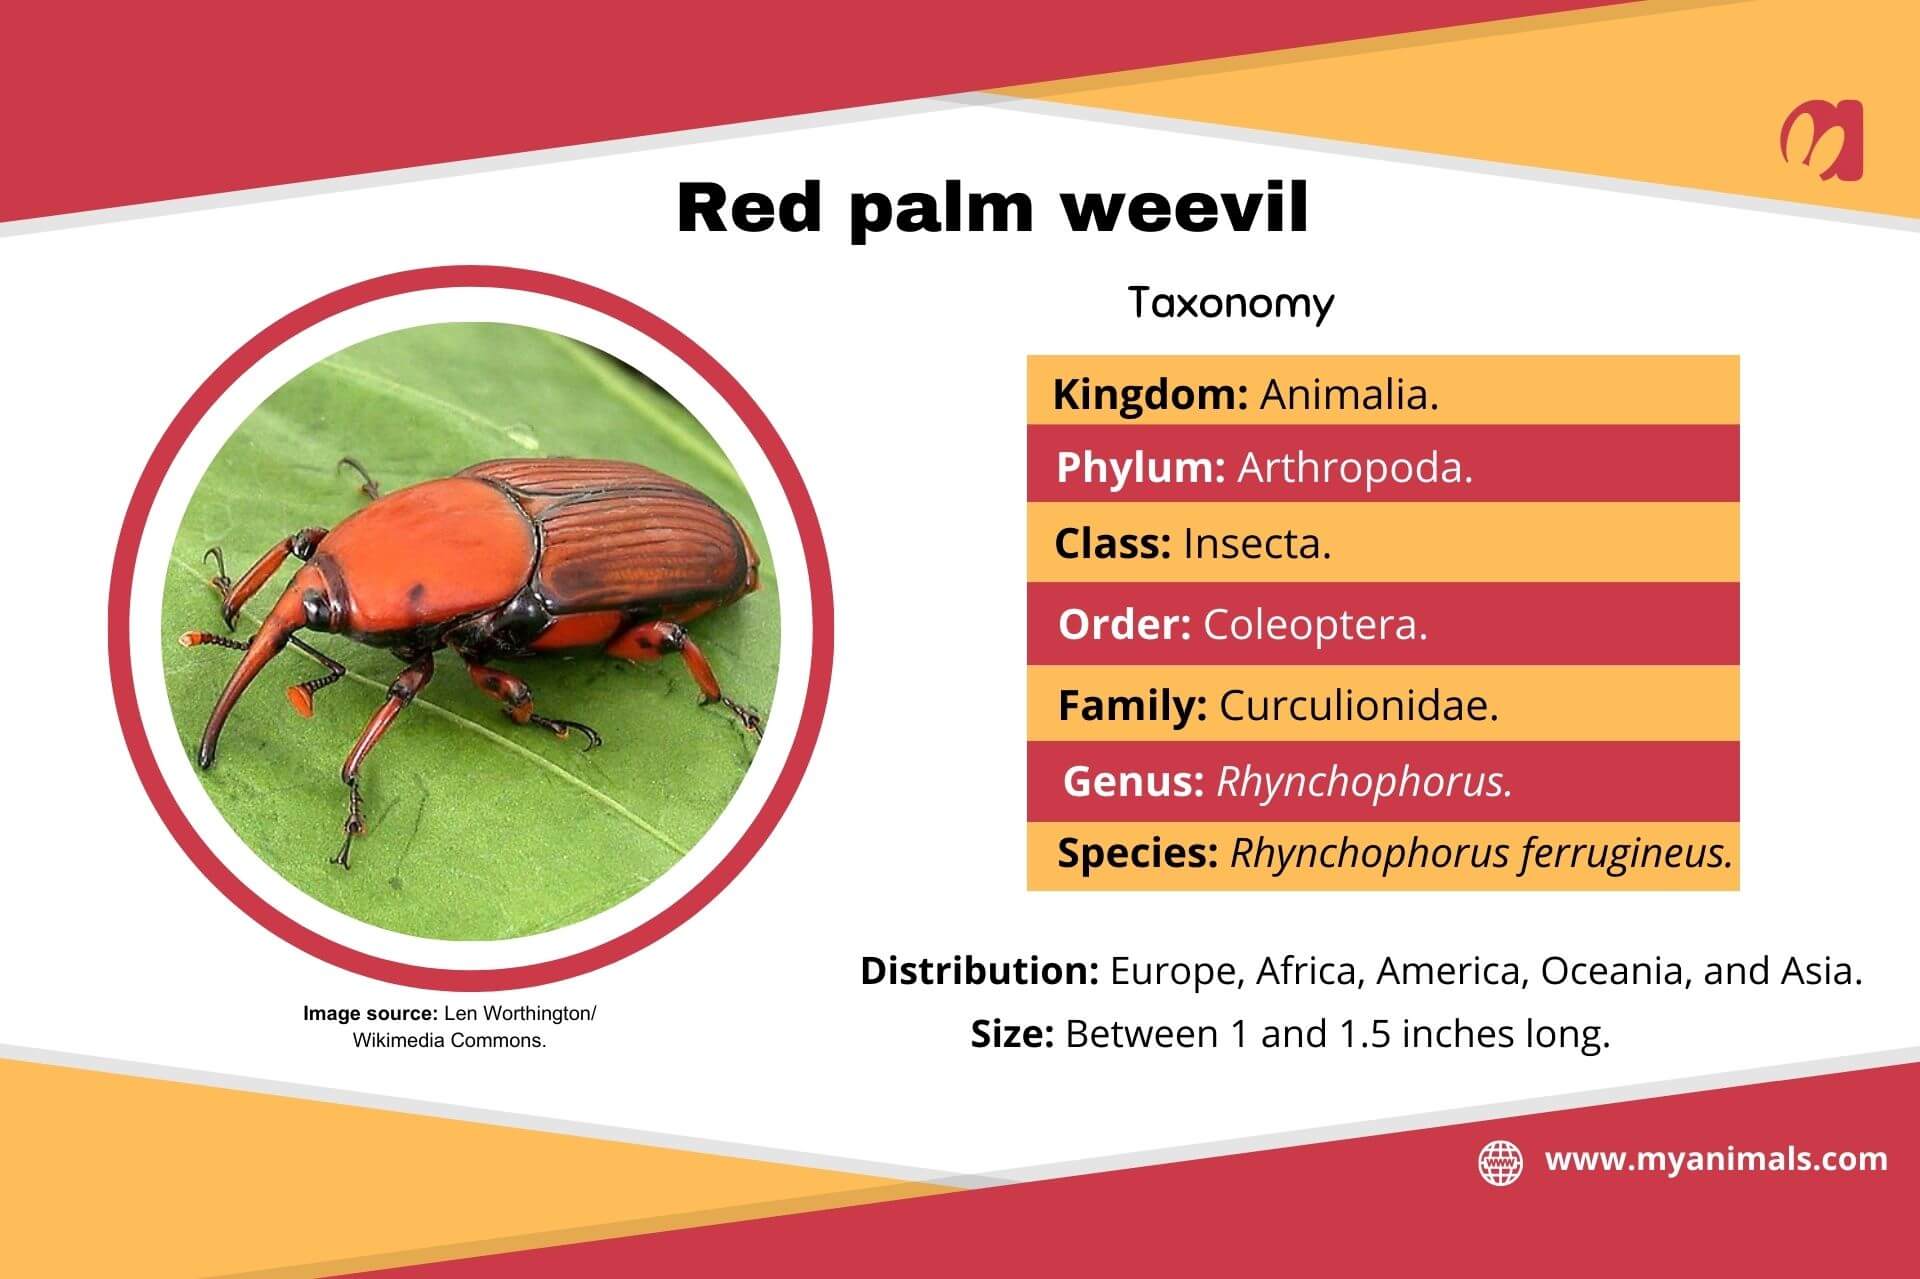 Information on the red palm weevil.